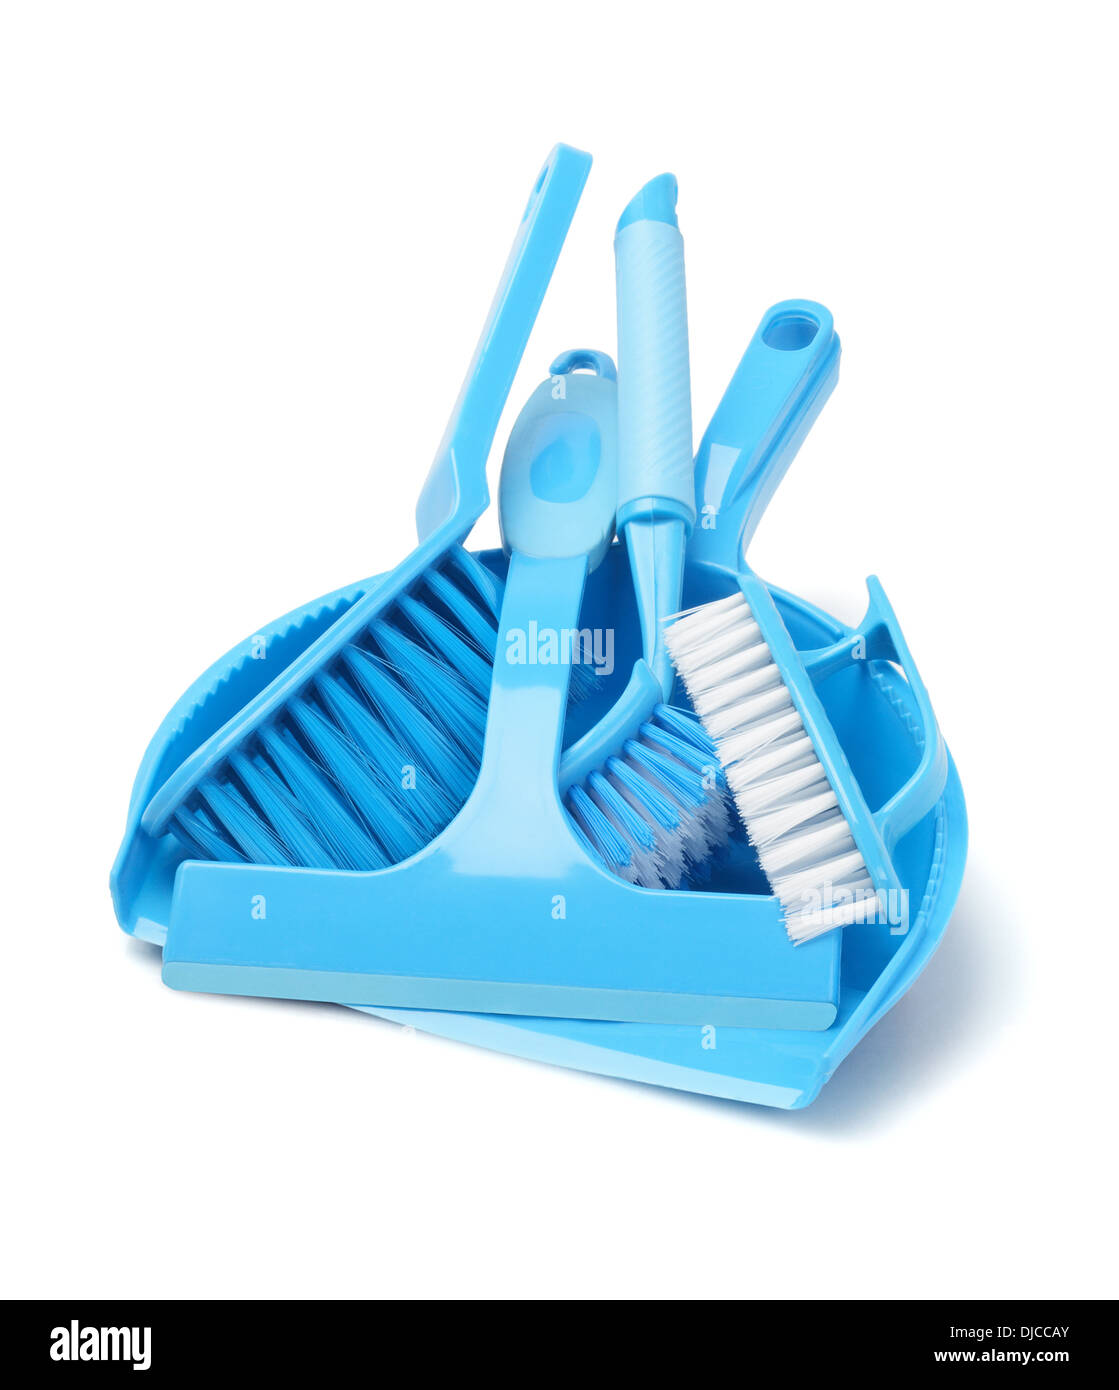 https://c8.alamy.com/comp/DJCCAY/household-cleaning-tools-on-white-background-DJCCAY.jpg